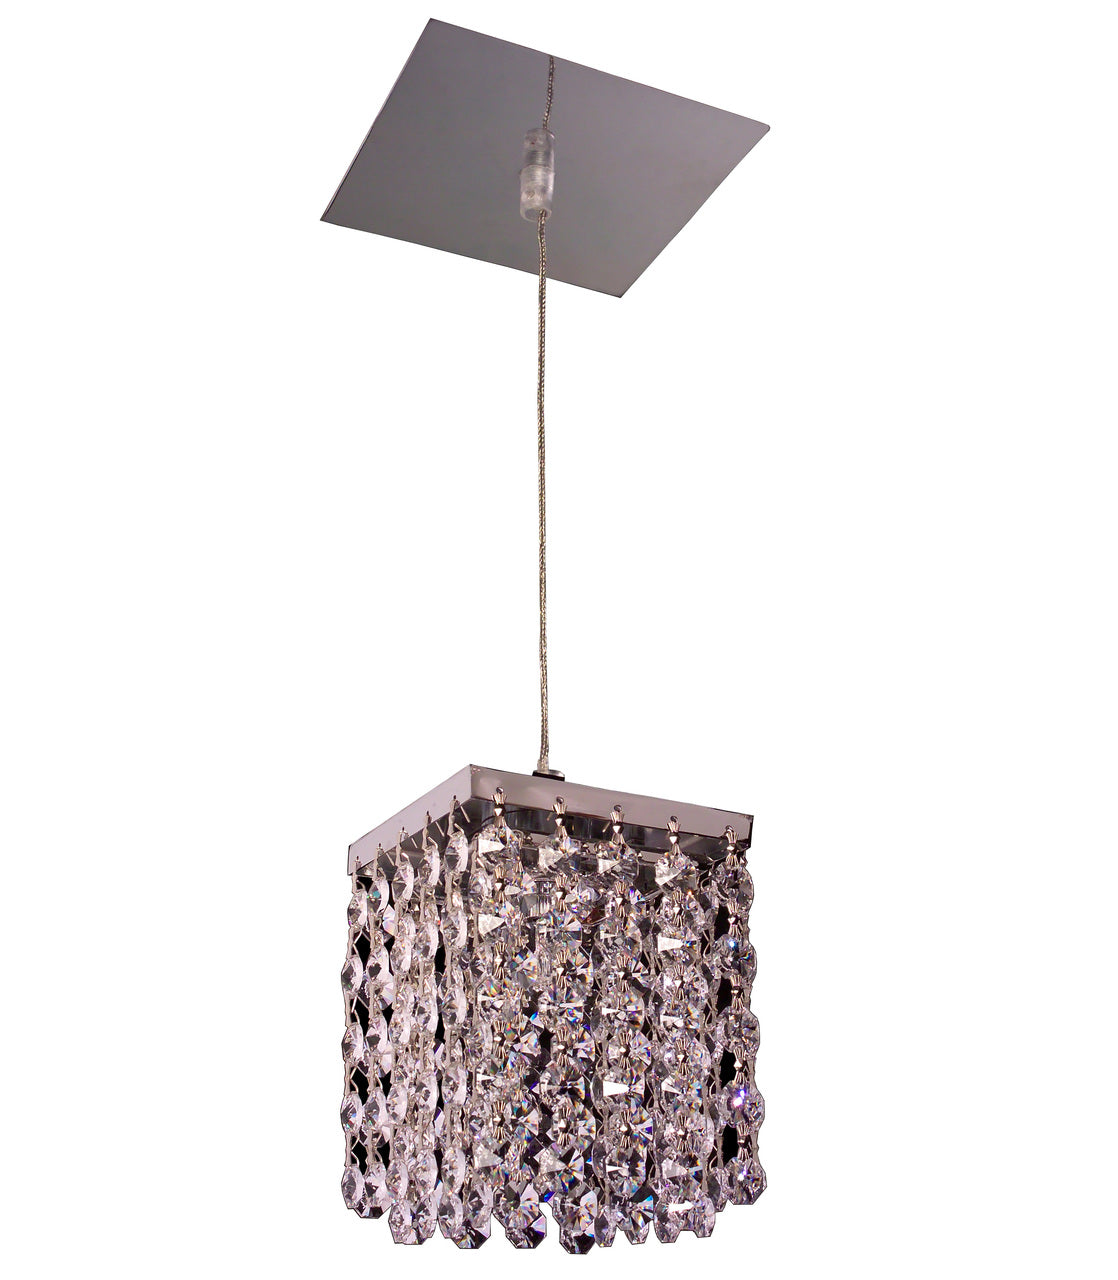 Classic Lighting 16101 SCSQ Bedazzle Crystal Pendant in Chrome